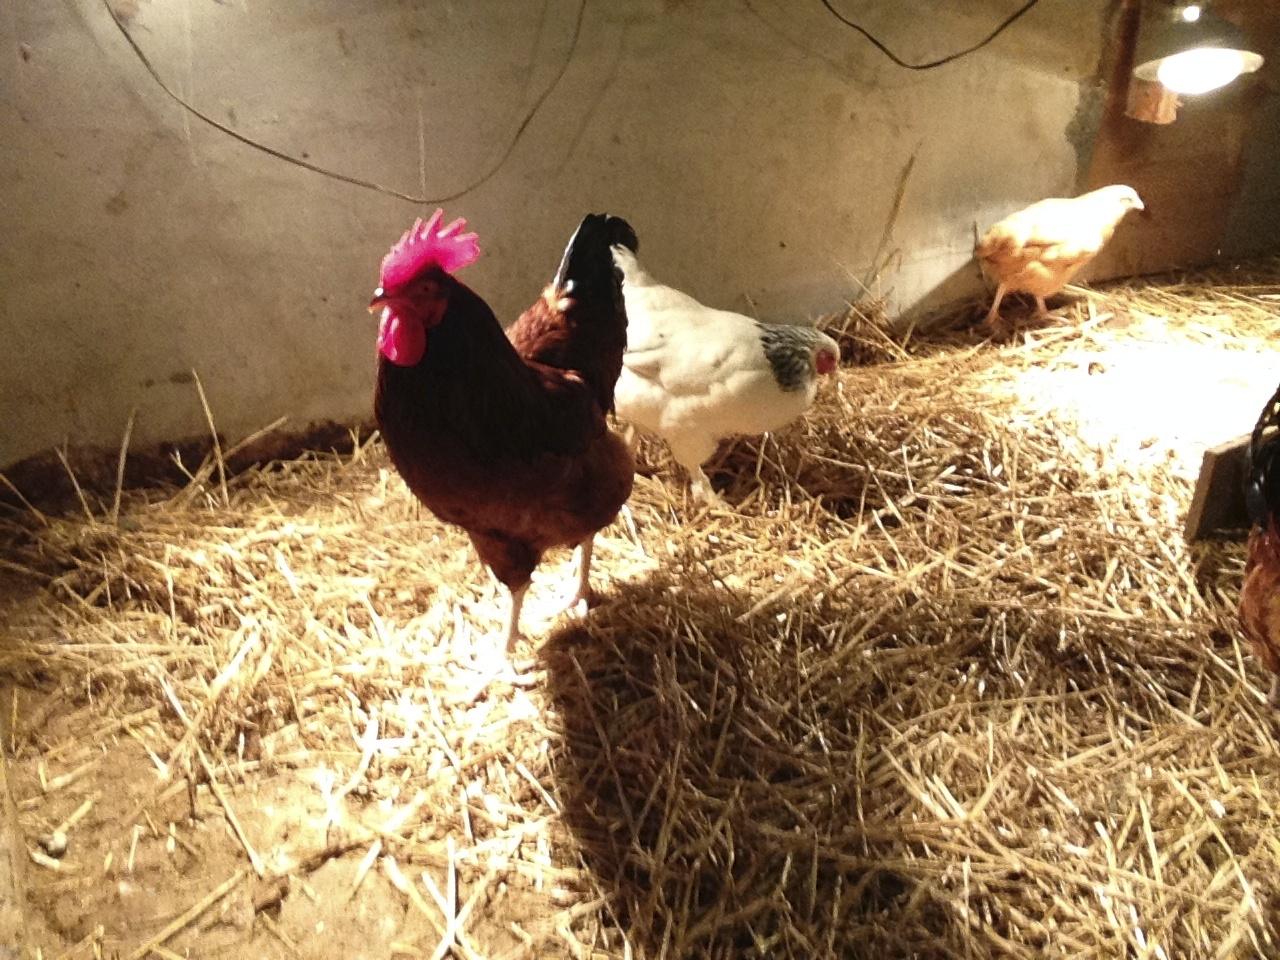 One of my roosters